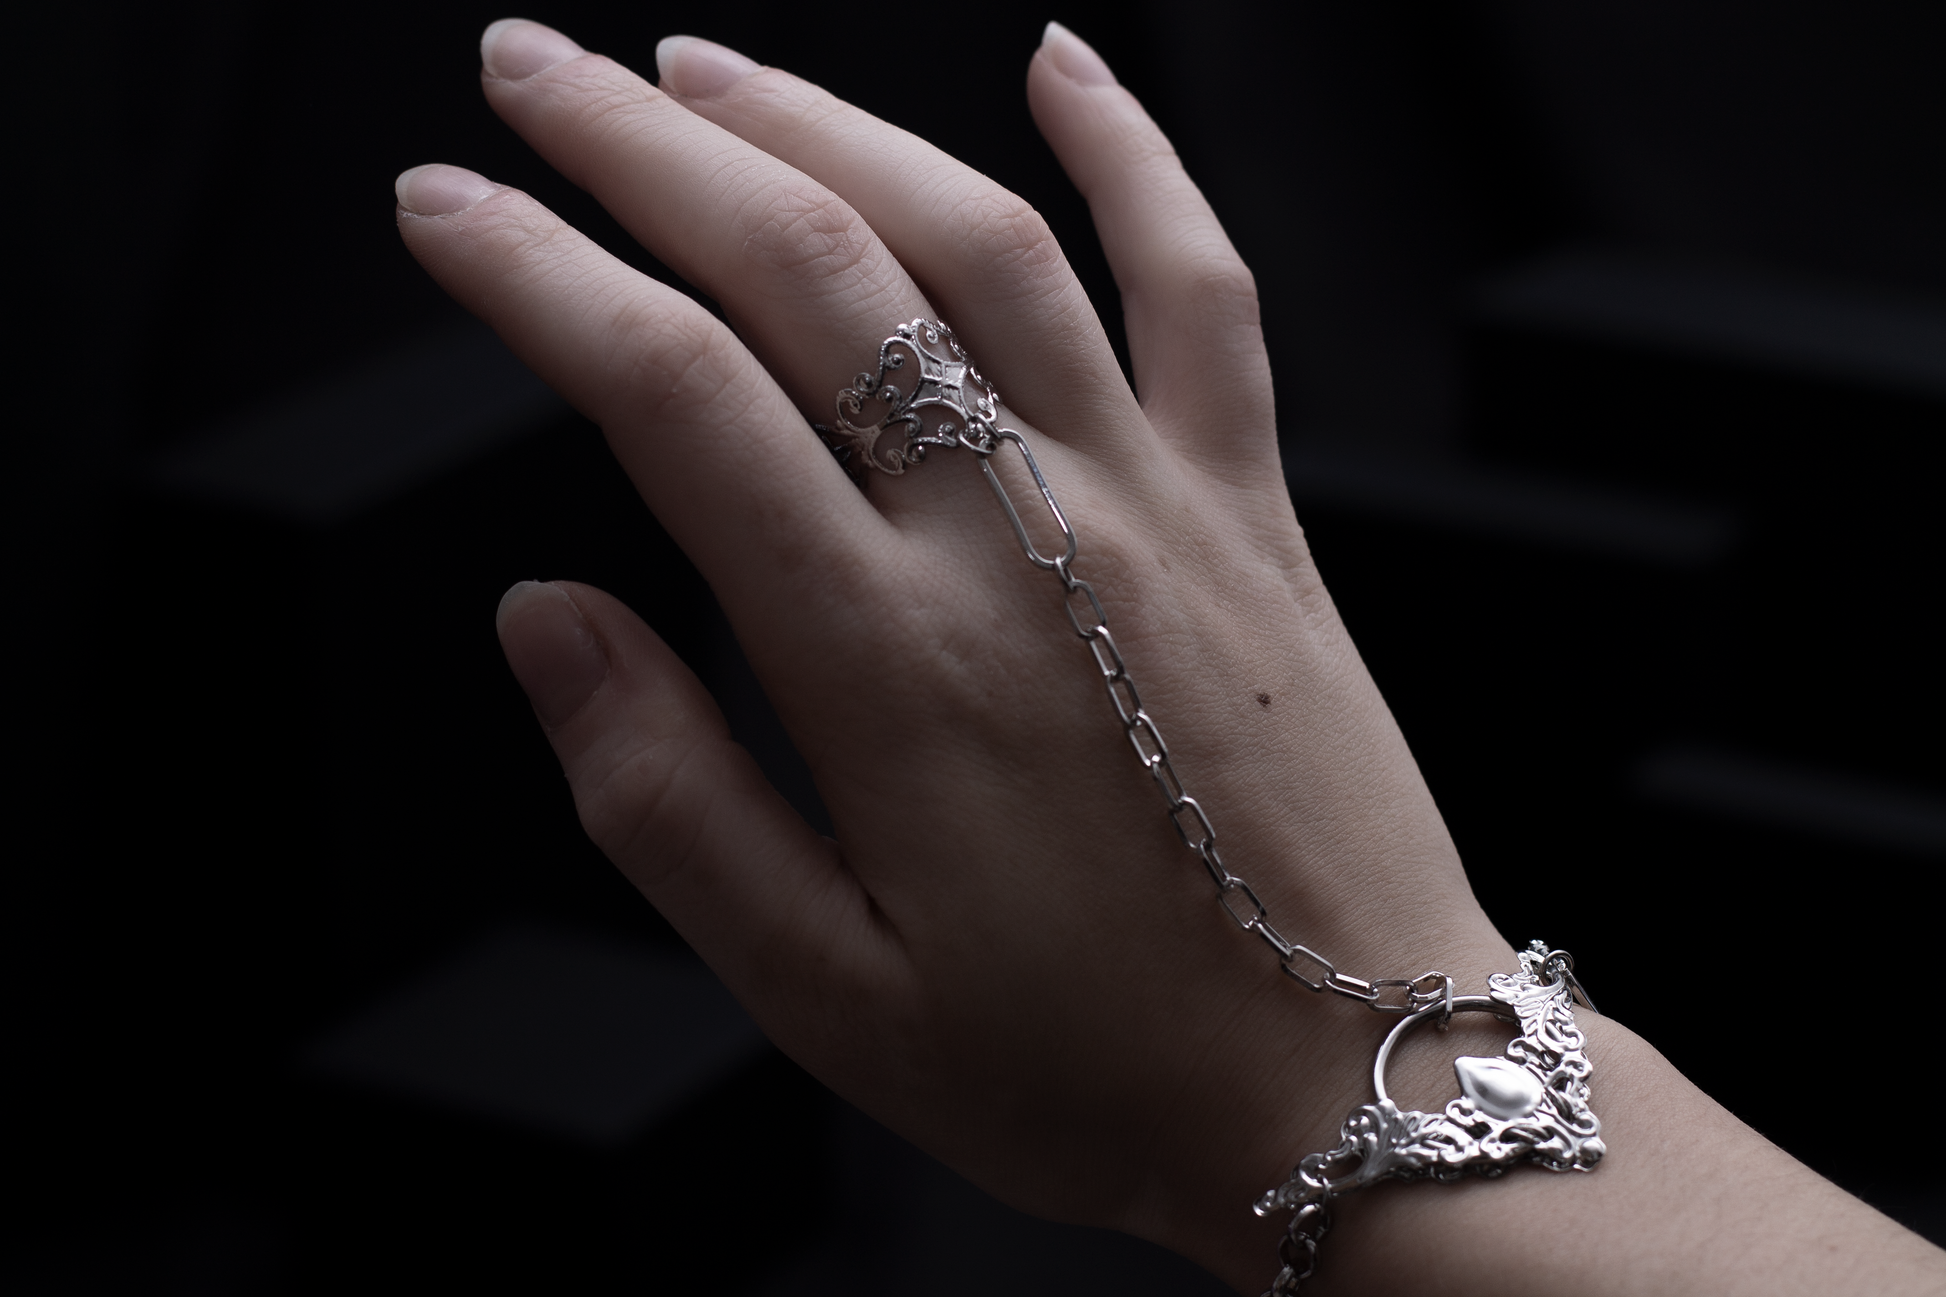 A hand displays a Myril Jewels hand chain bracelet ring, embodying a dark avant-garde aesthetic. The delicate chain links to a detailed filigree ring, capturing the neo-goth spirit perfect for Halloween, everyday wear, or as a unique piece for goth-inspired ensembles.